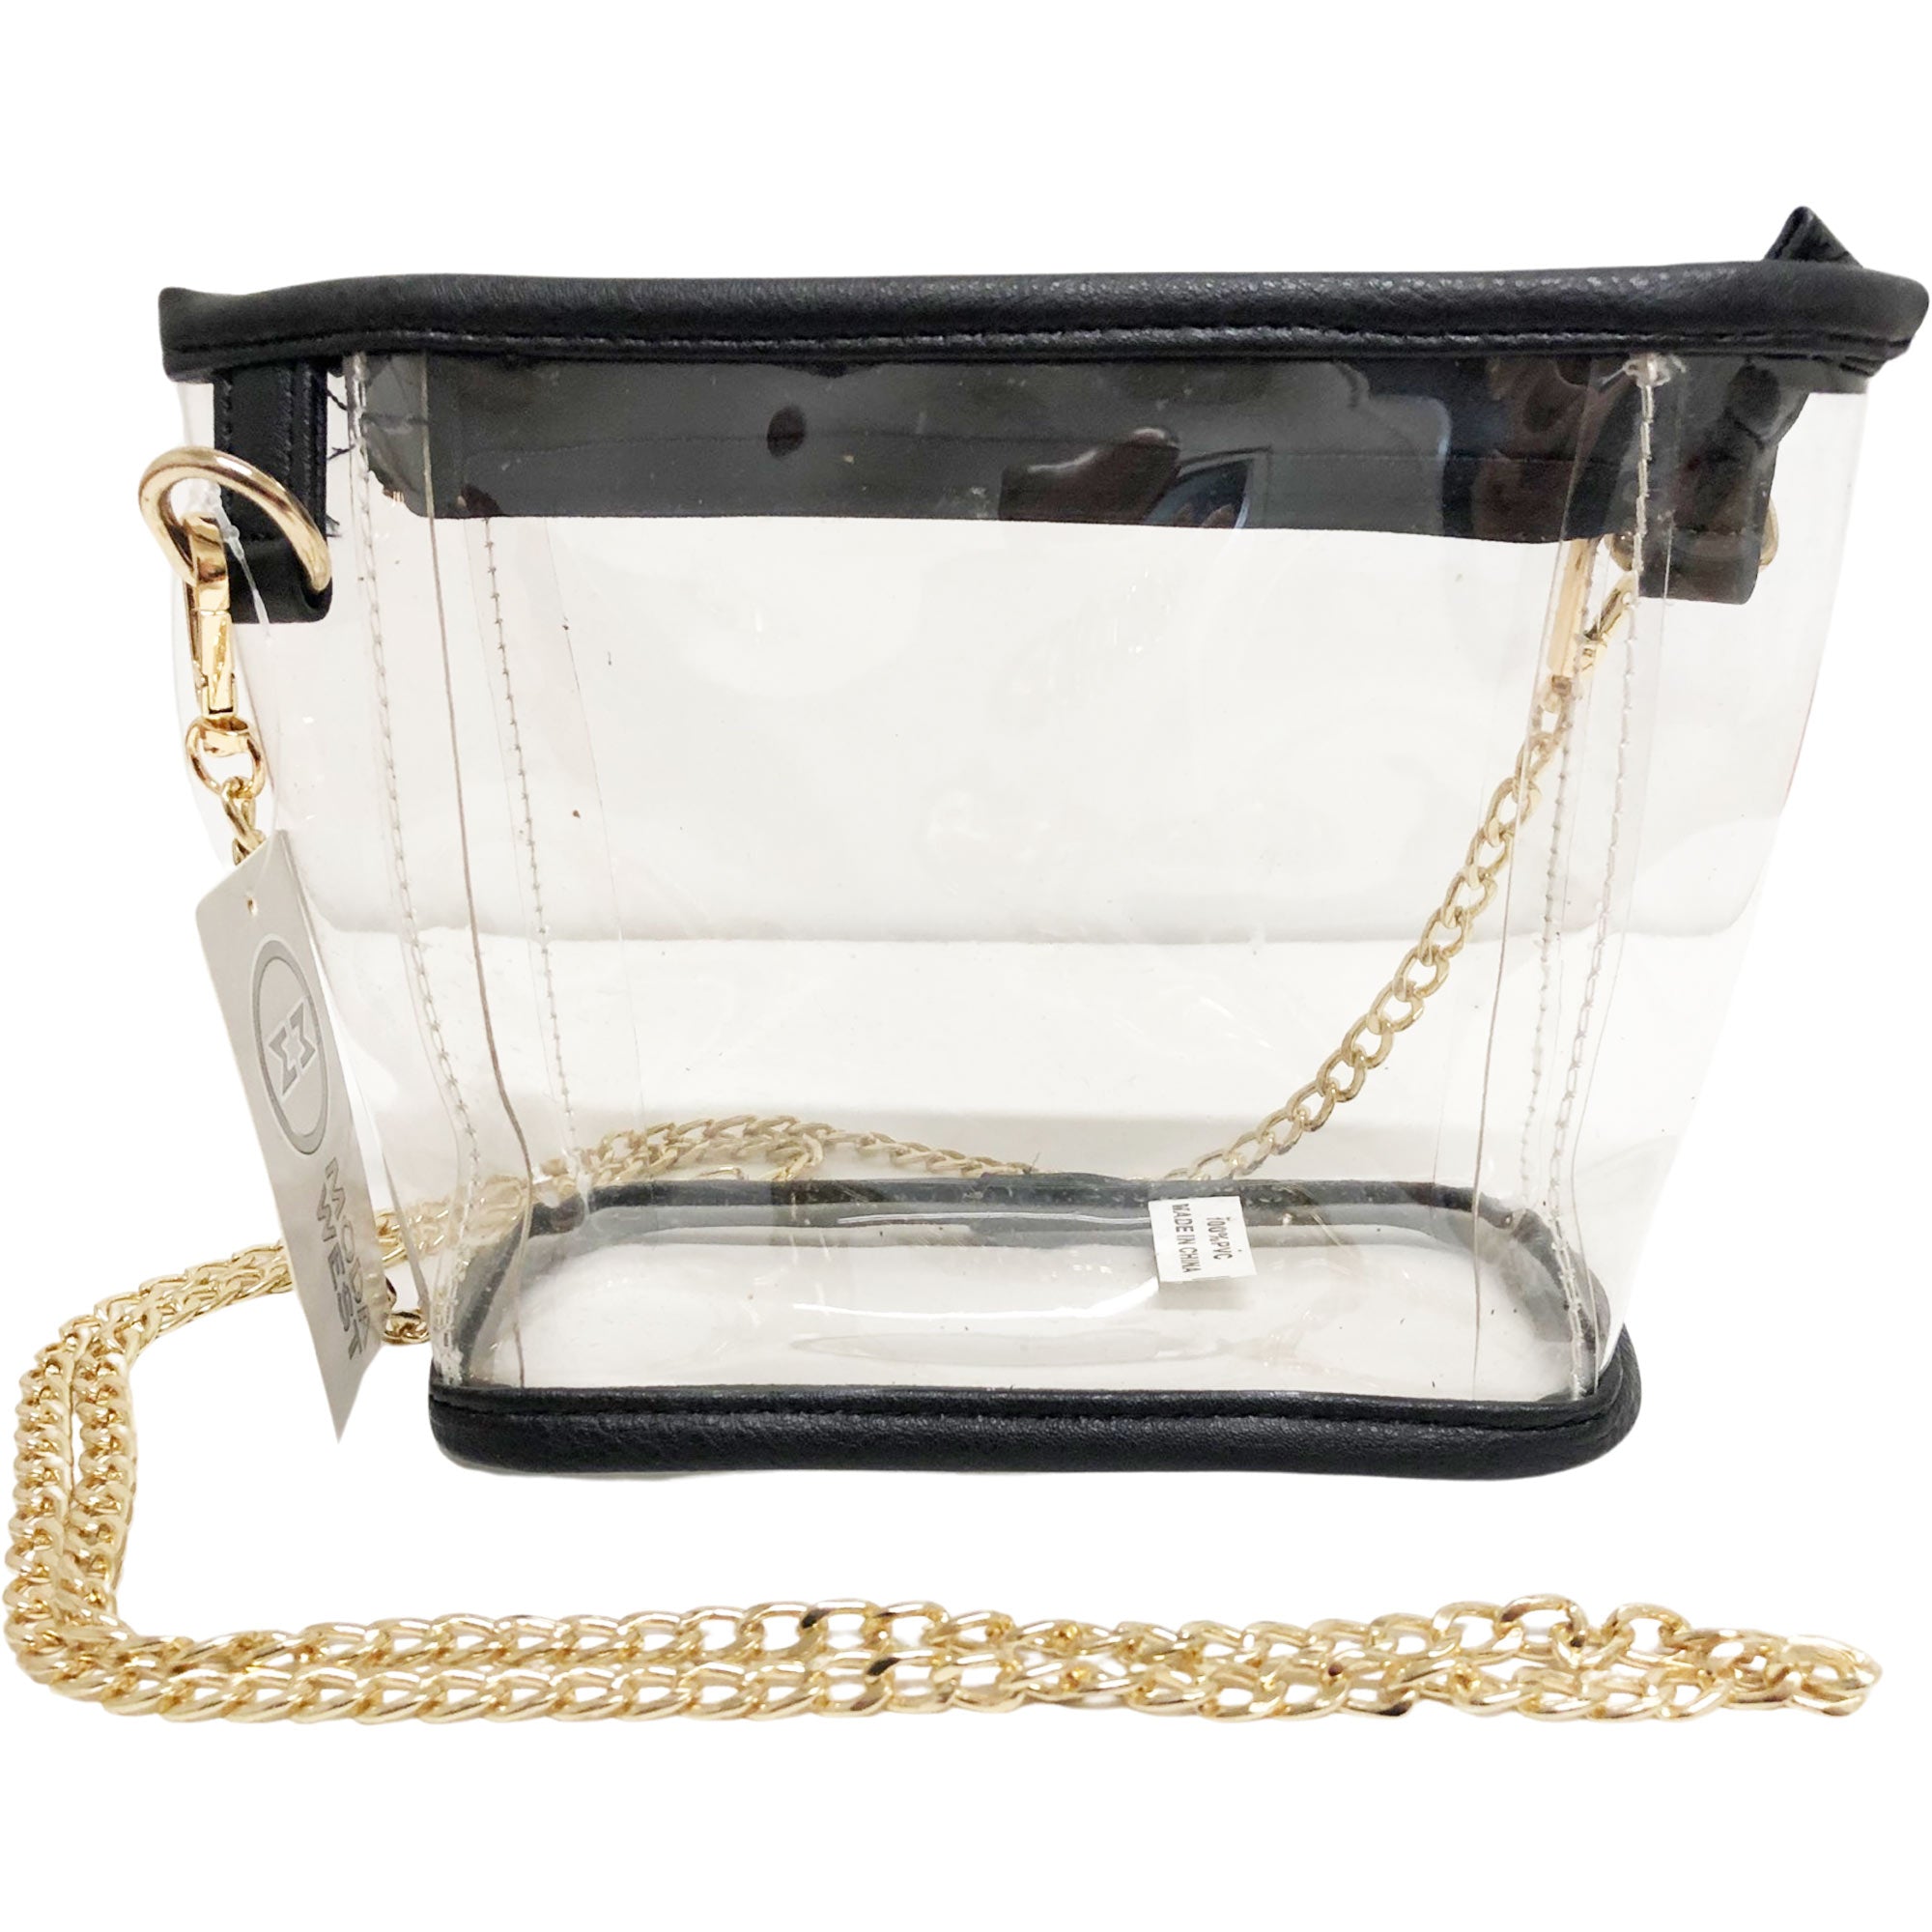 CLEARANCE WHOLESALE SMALL CLEAR HANDBAG (CASE OF 24- $2.50 / PIECE) Wholesale Transparent Bag Trimmed in Black SKU: C1016-BLK-24